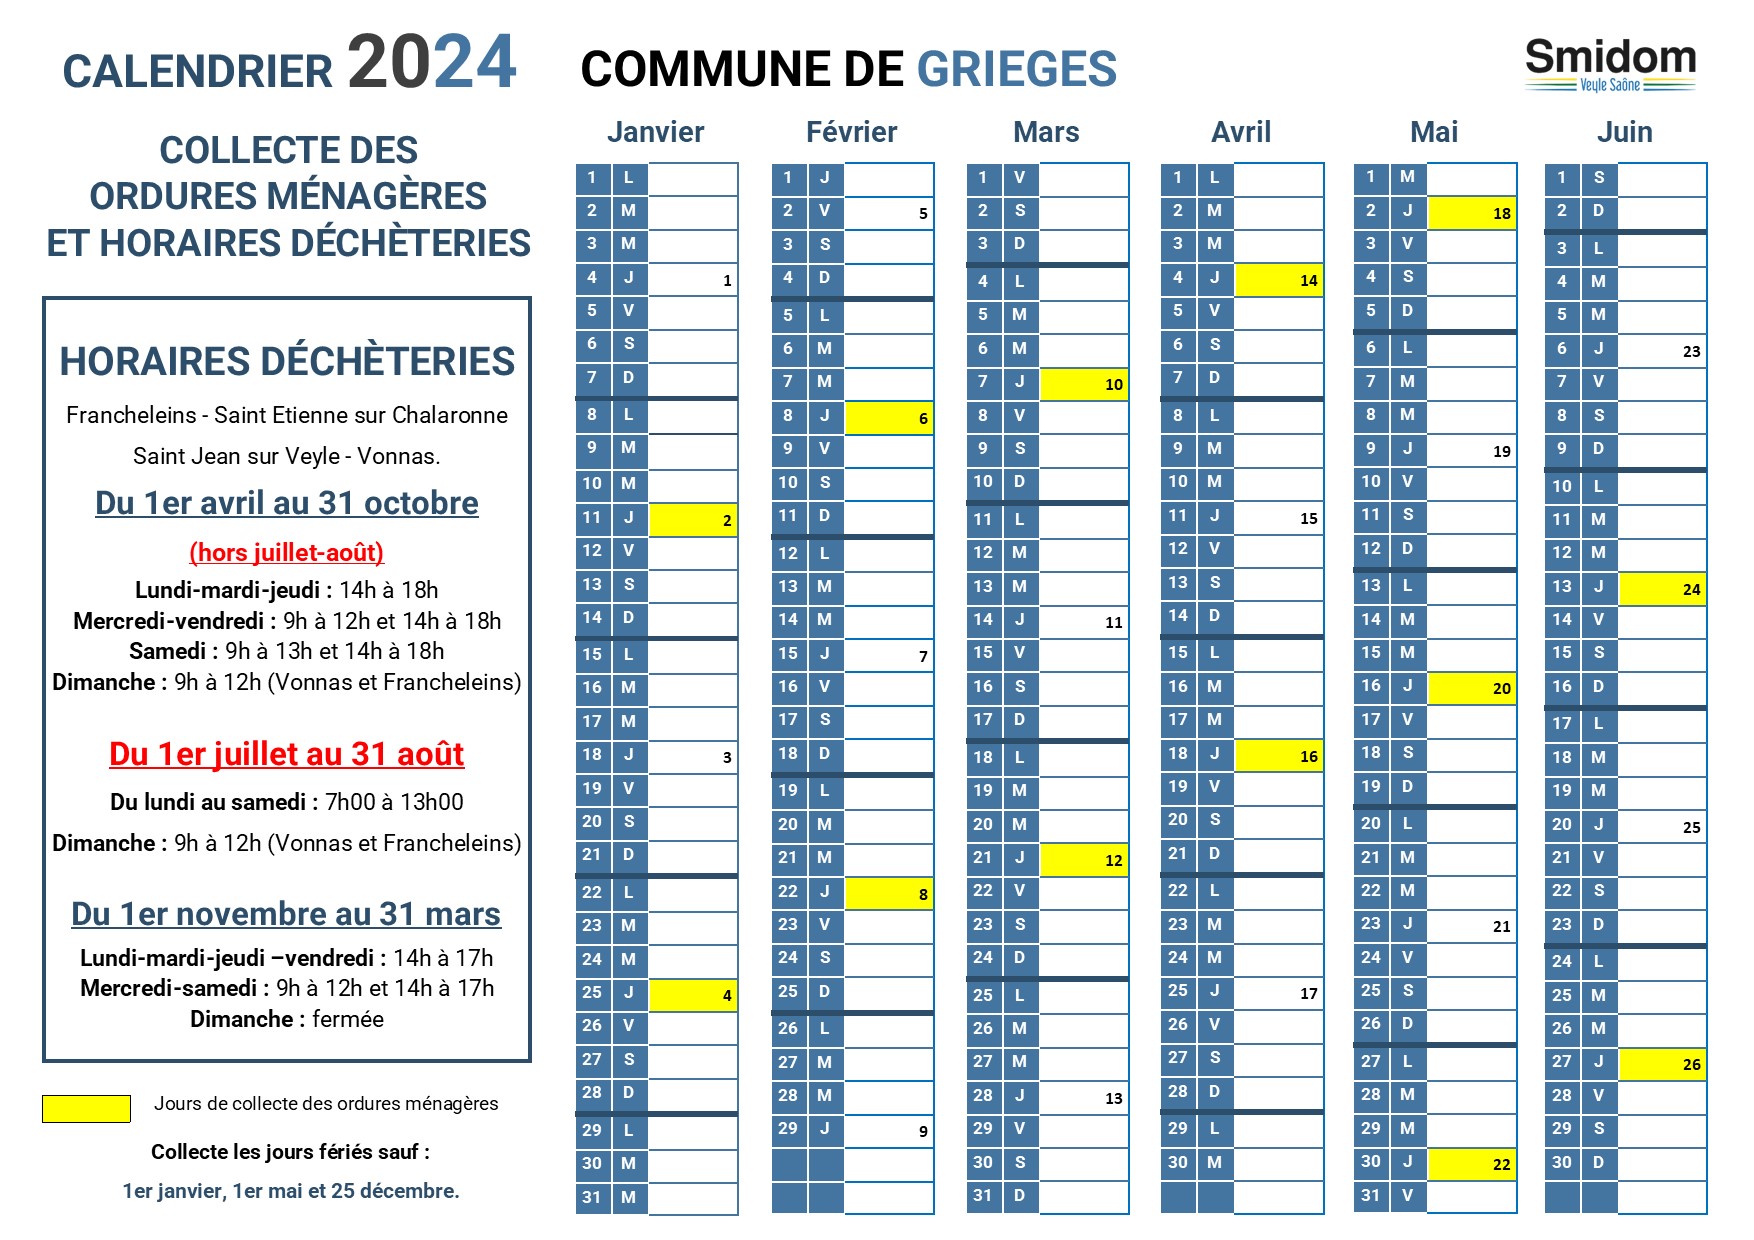 GRIEGES - Calendrier 2024 - 1.jpg